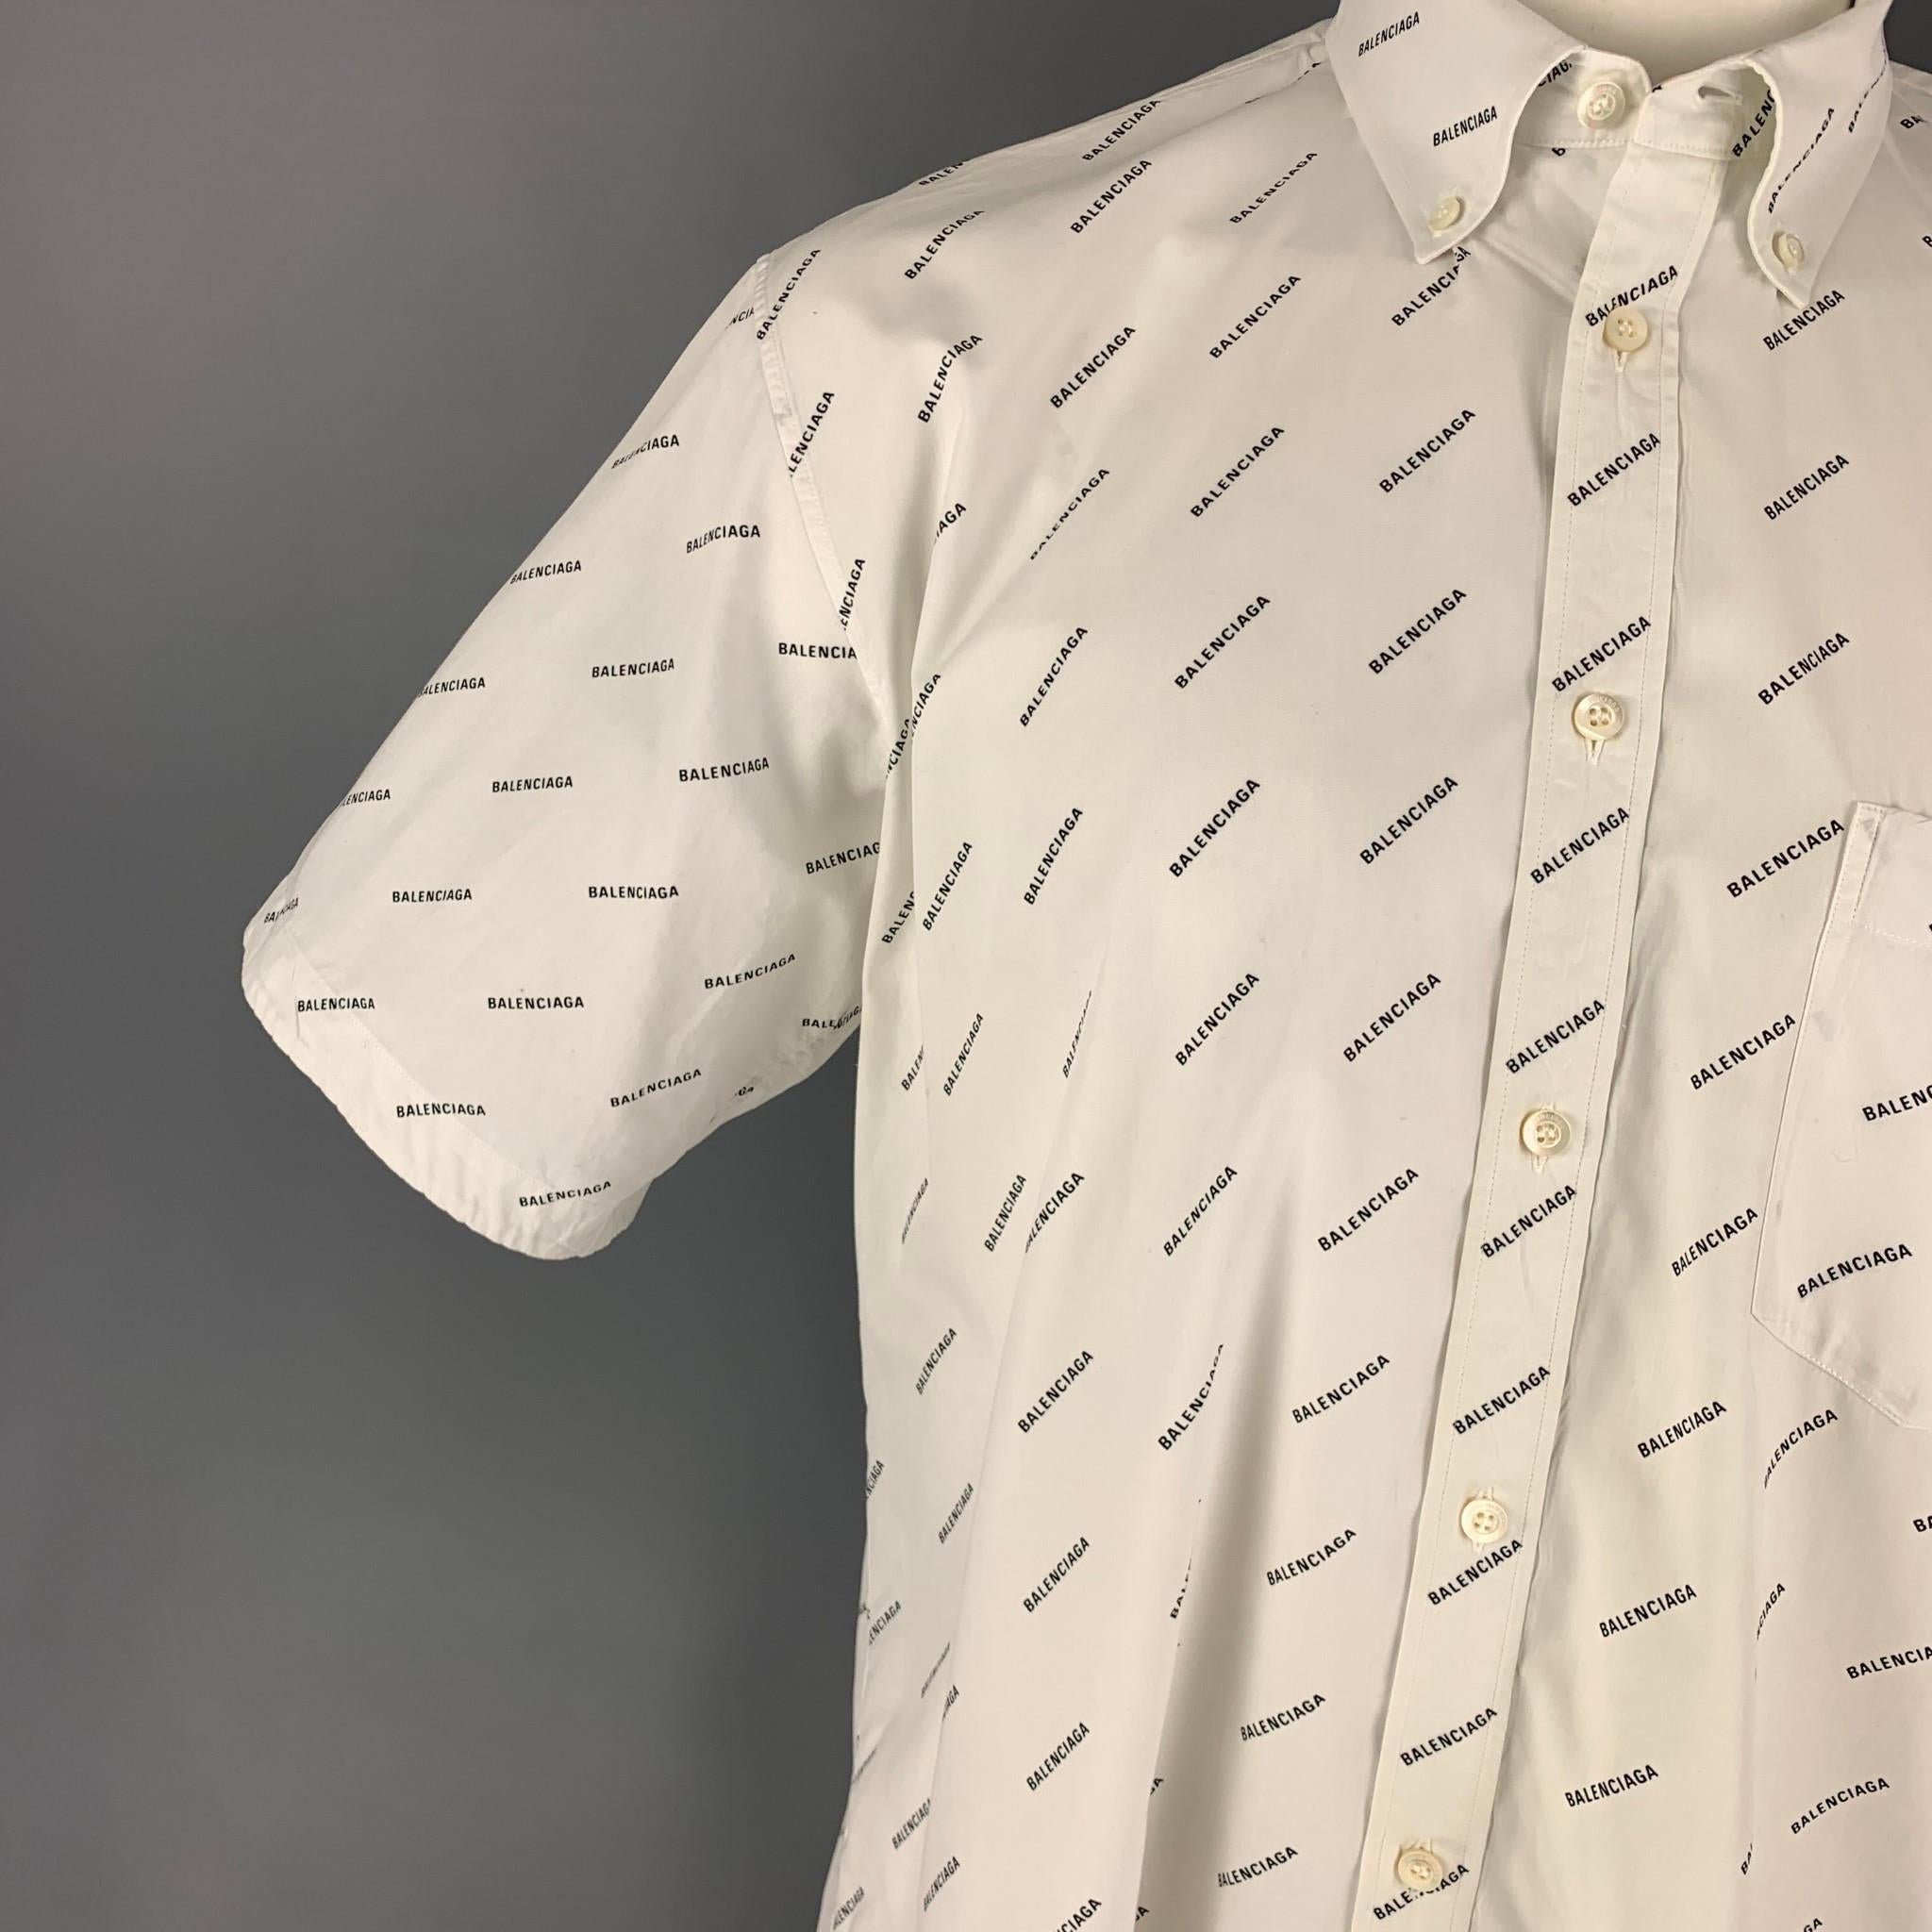 BALENCIAGA short sleeve shirt comes in a white & black logo cotton featuring a buttoned down collar, patch pocket, and a button up closure. Made in Italy.

Very Good Pre-Owned Condition.
Marked: 39

Measurements:

Shoulder: 20 in.
Chest: 46